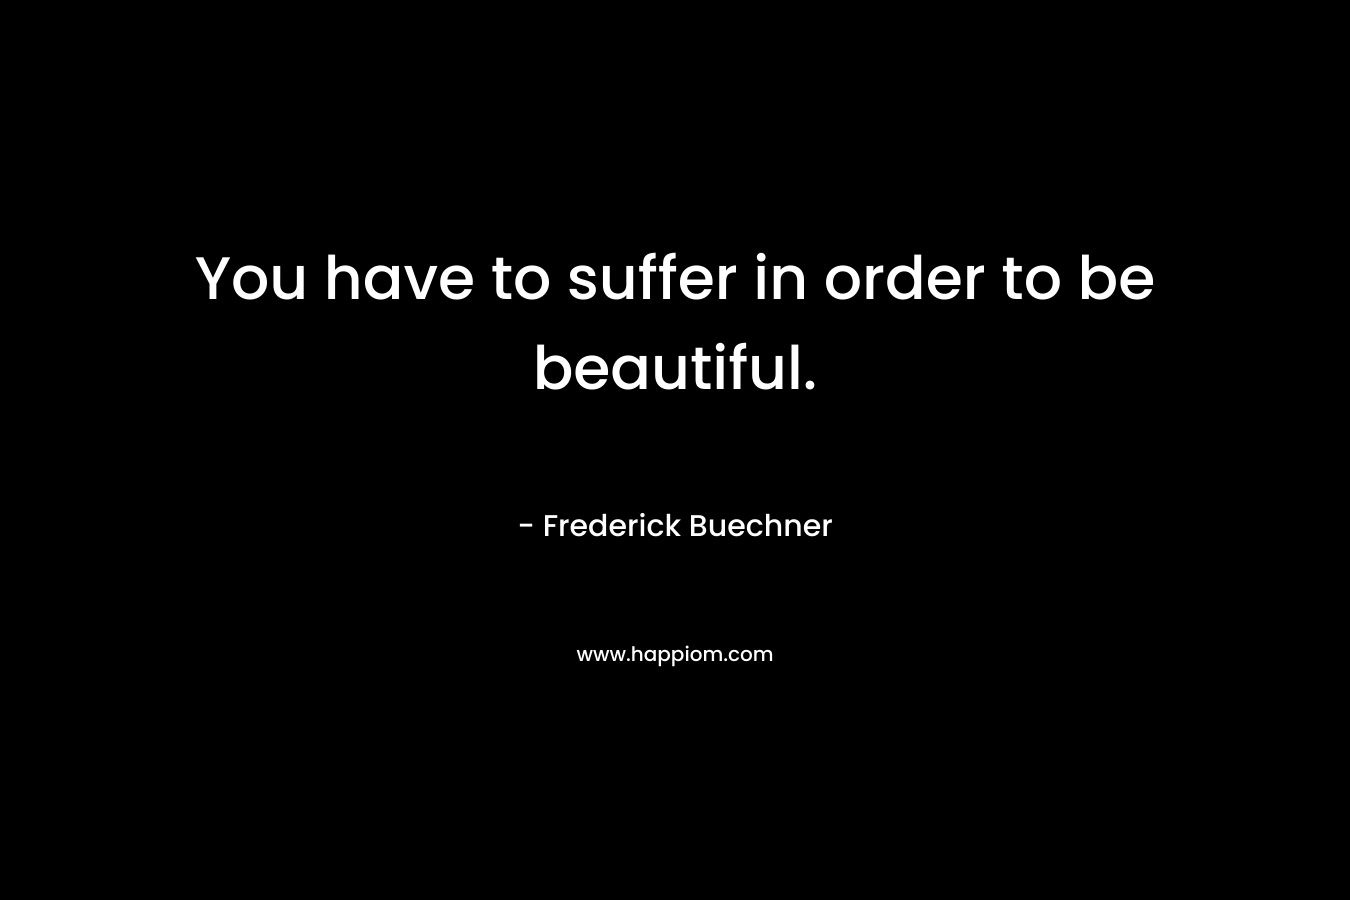 You have to suffer in order to be beautiful.